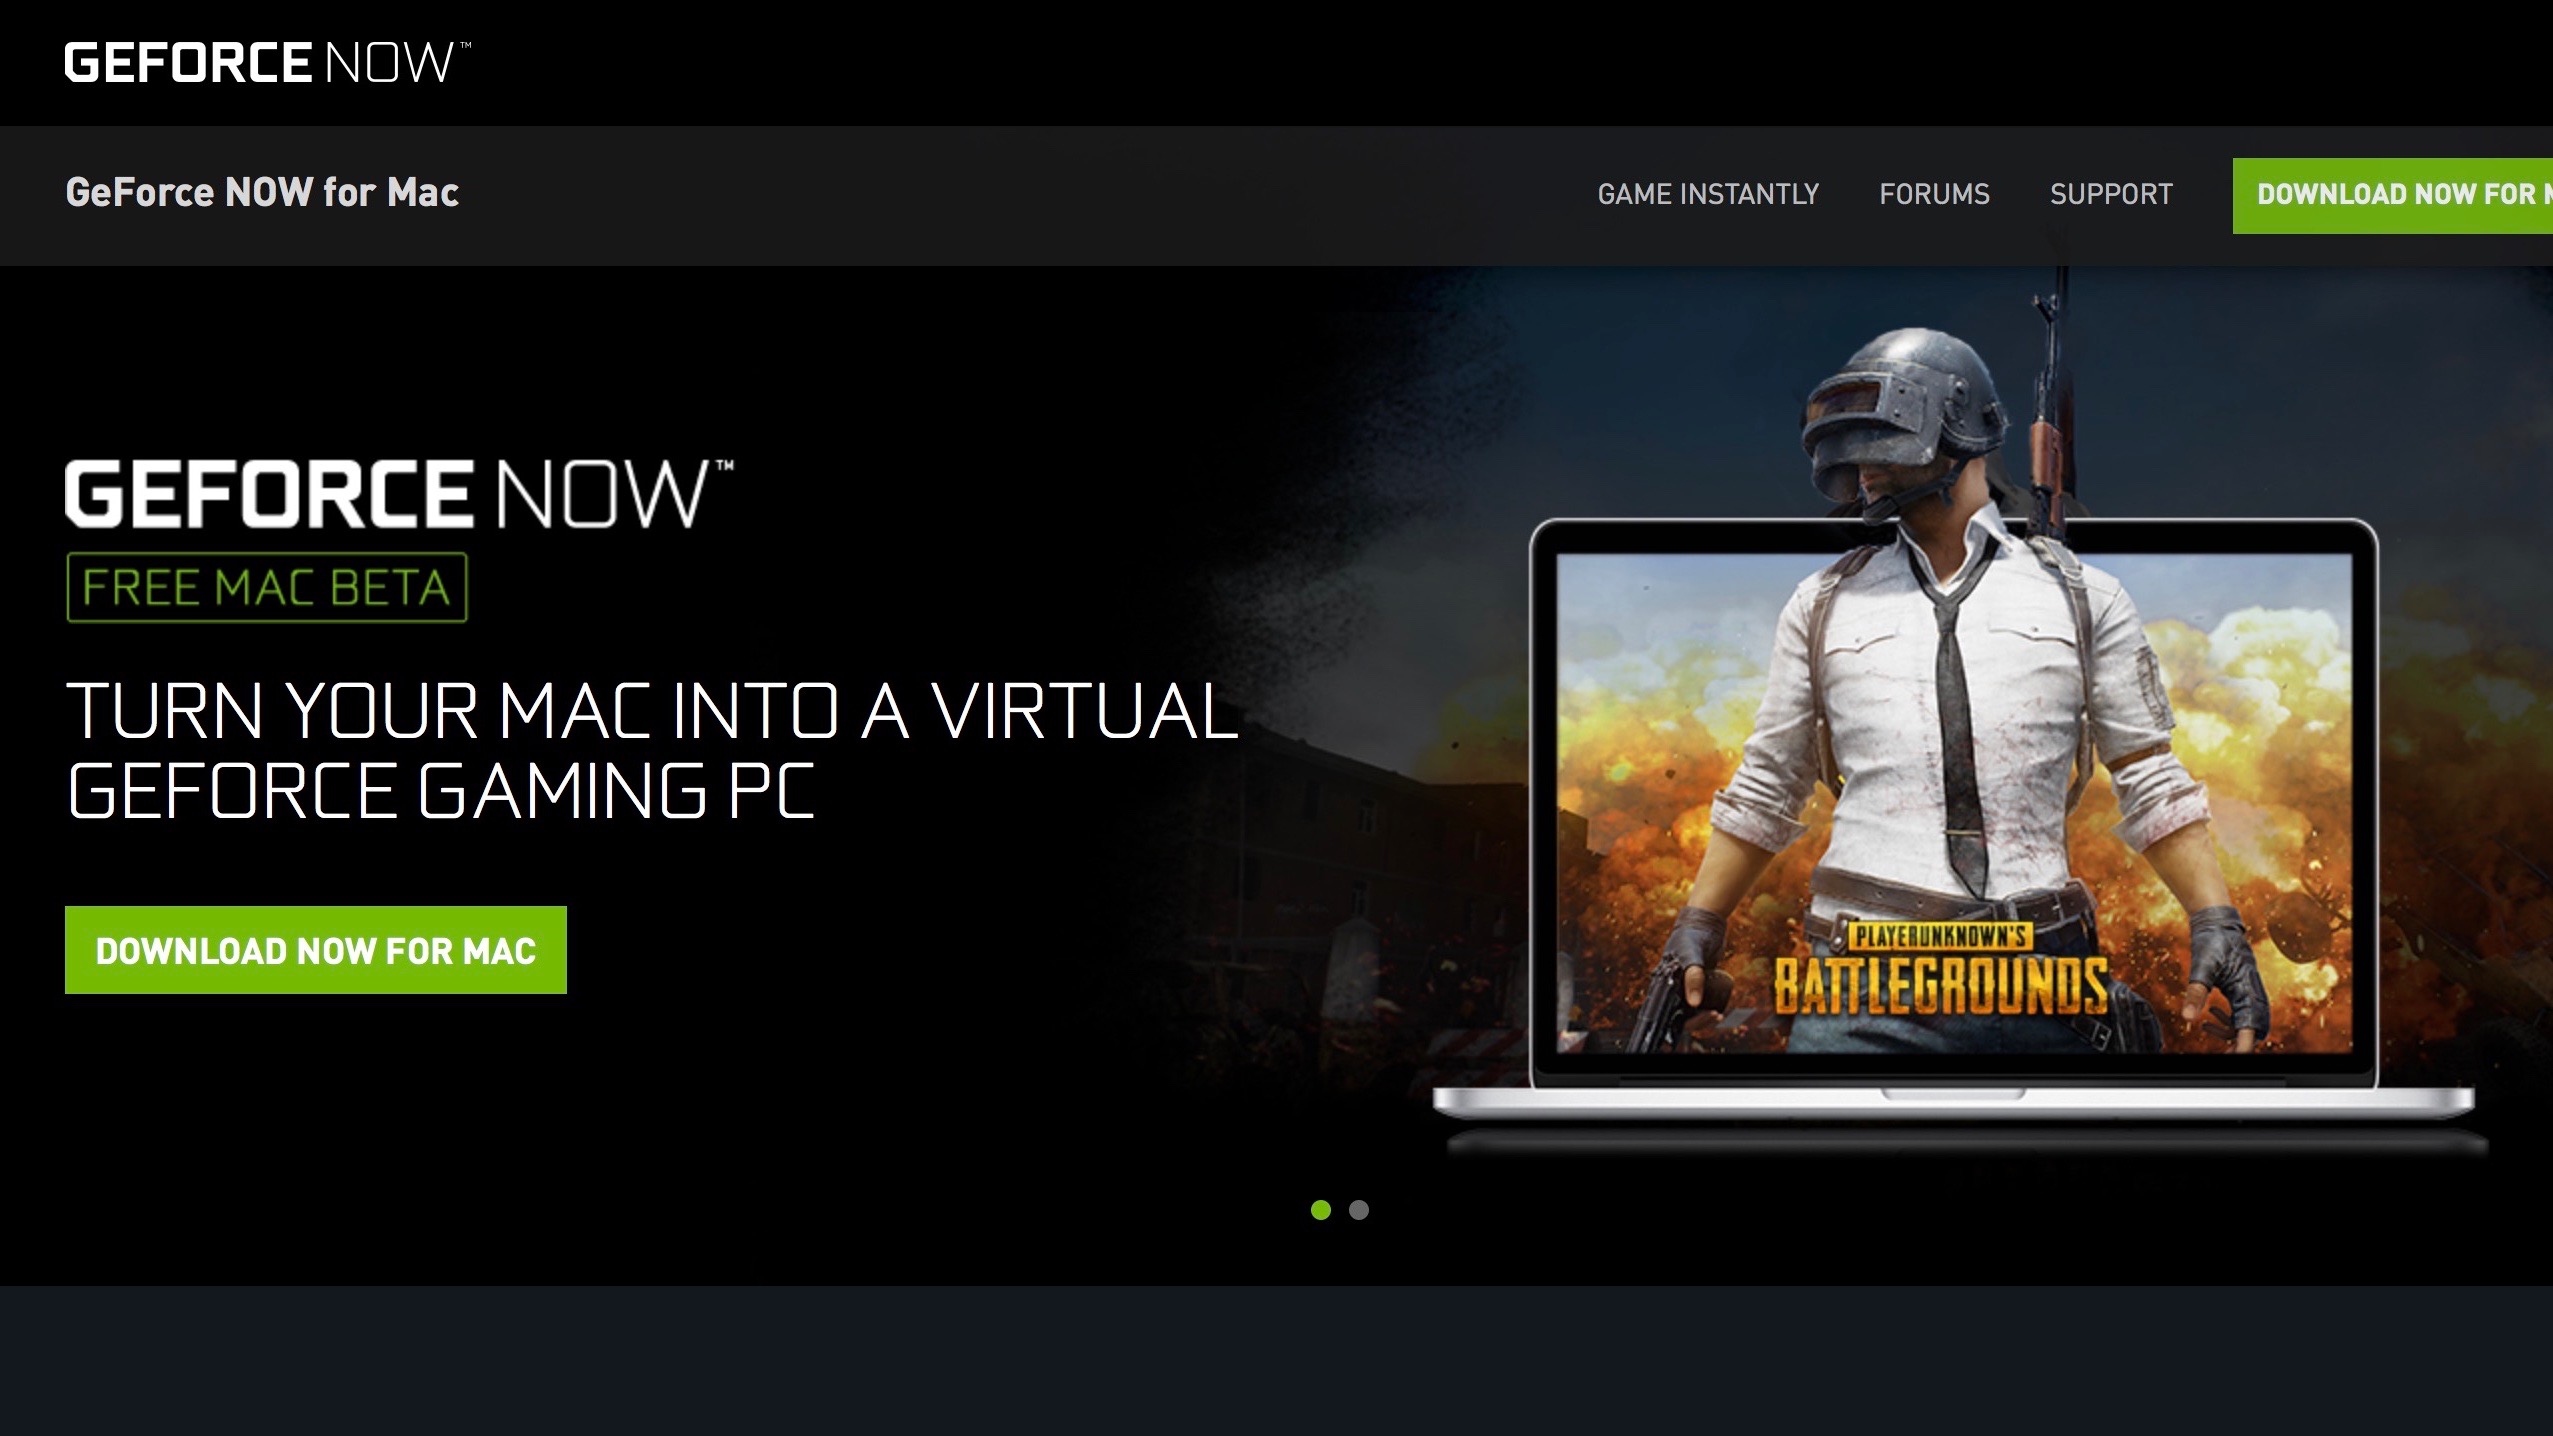 geforce now download for ios